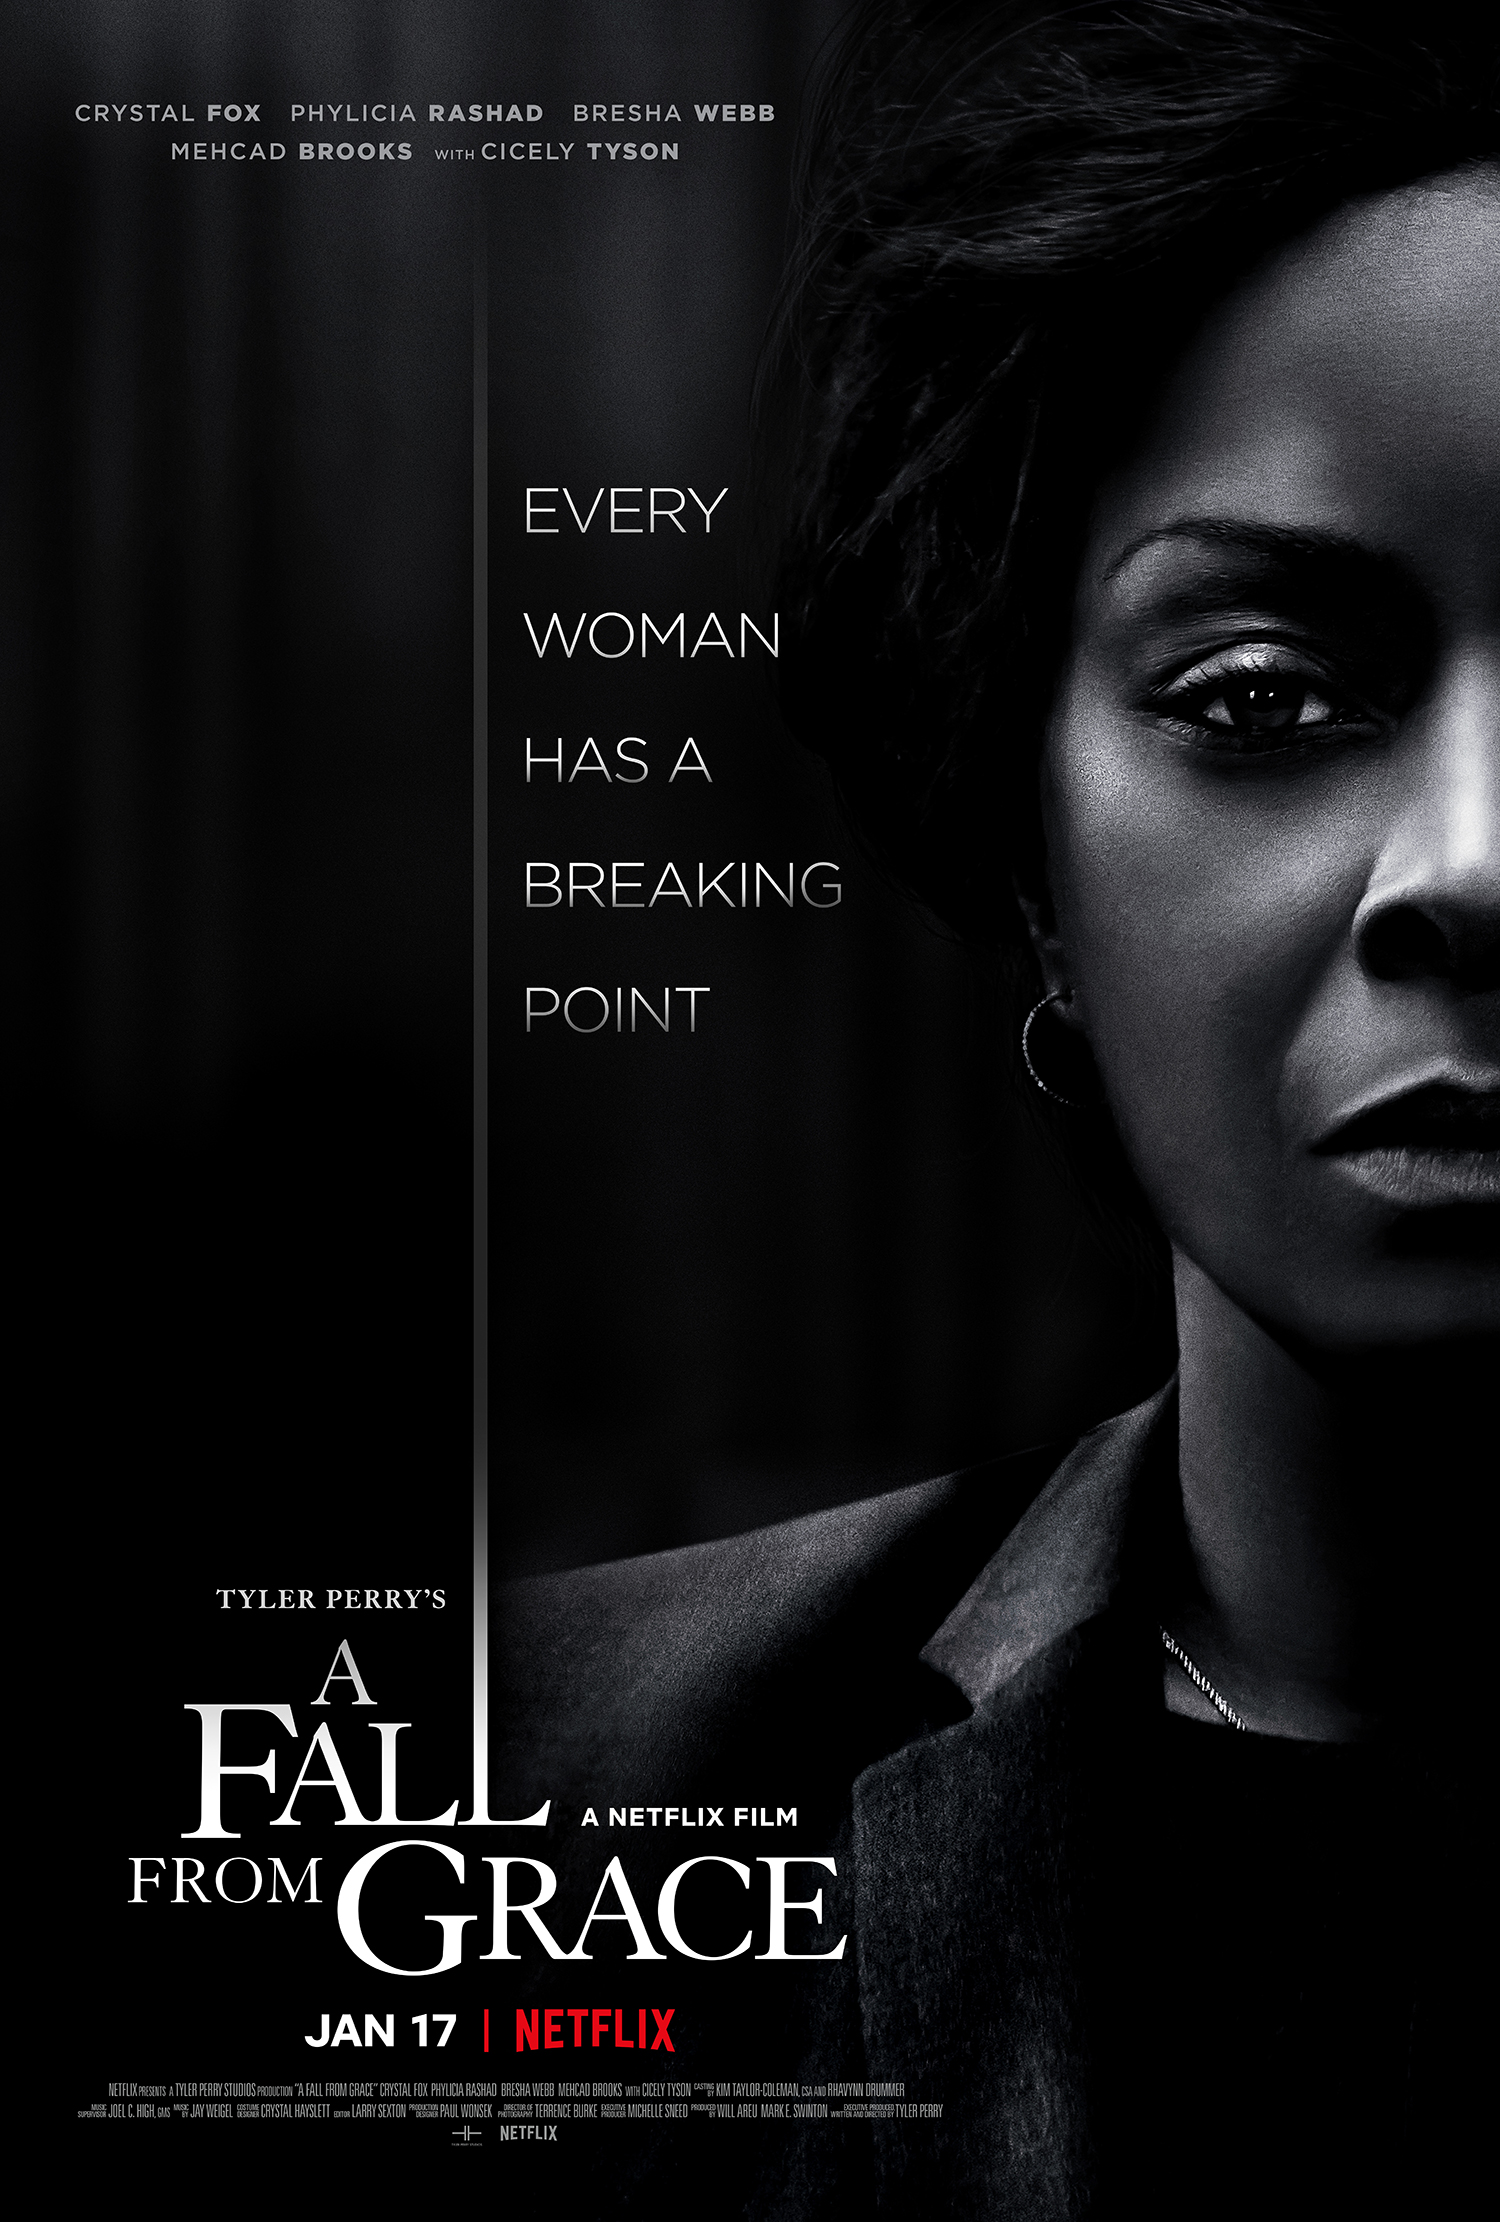 The Trailer For Tyler Perry’s Netflix Movie ‘Fall From Grace'[VIDEO